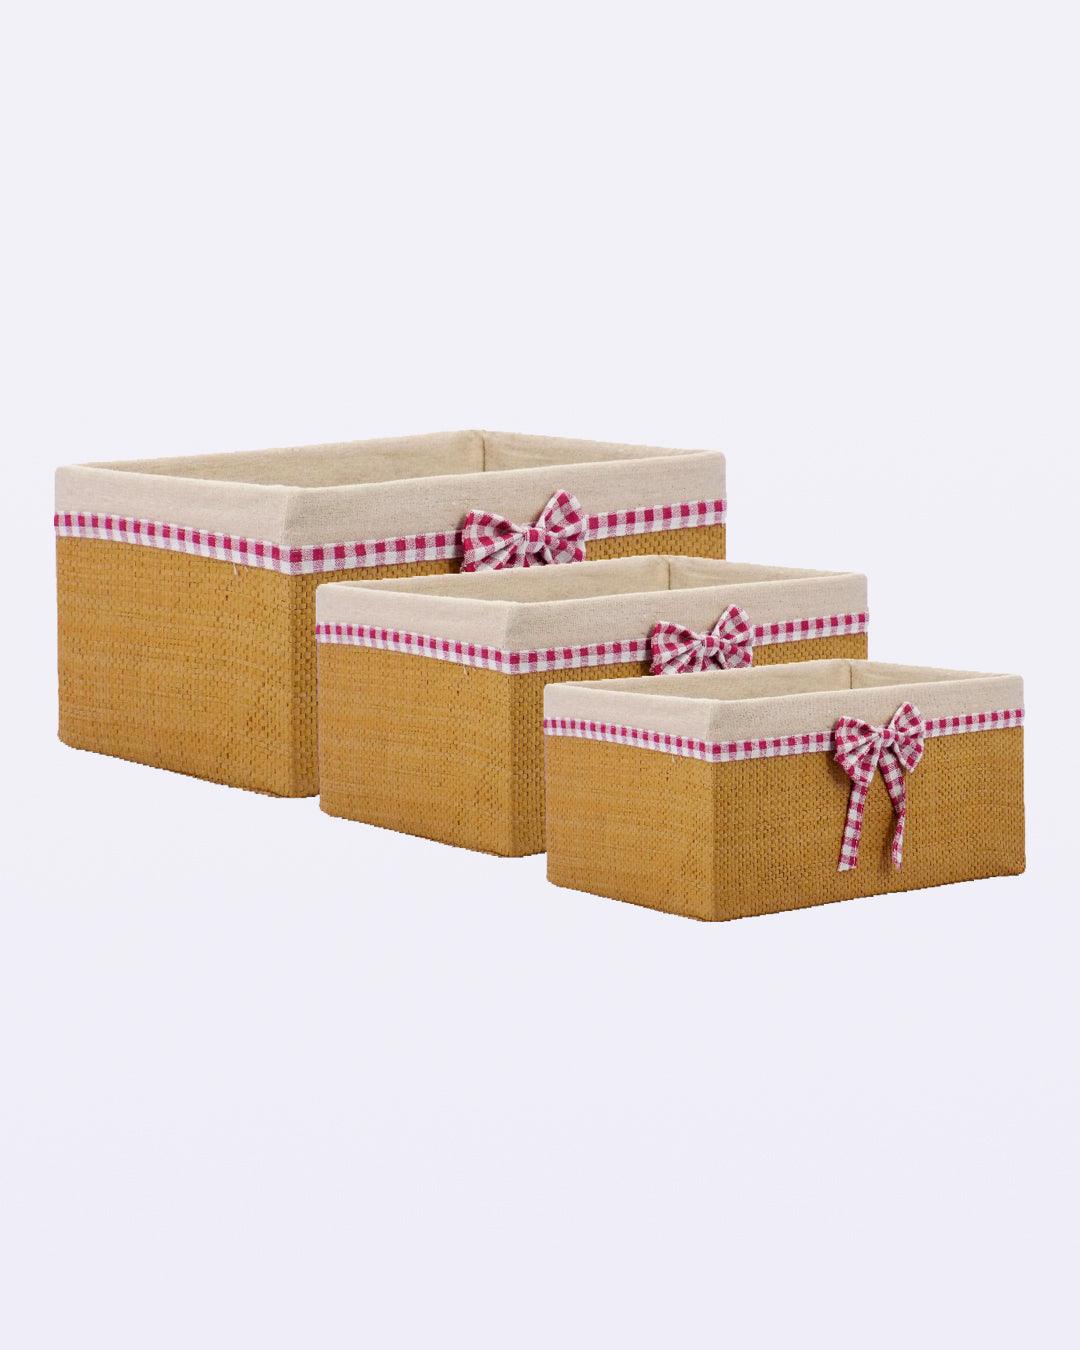 Fabric Basket, for Home Storage, Gingham Print Ribbon, Natural Colour, Paper &Fabric, Set of 3 - MARKET 99